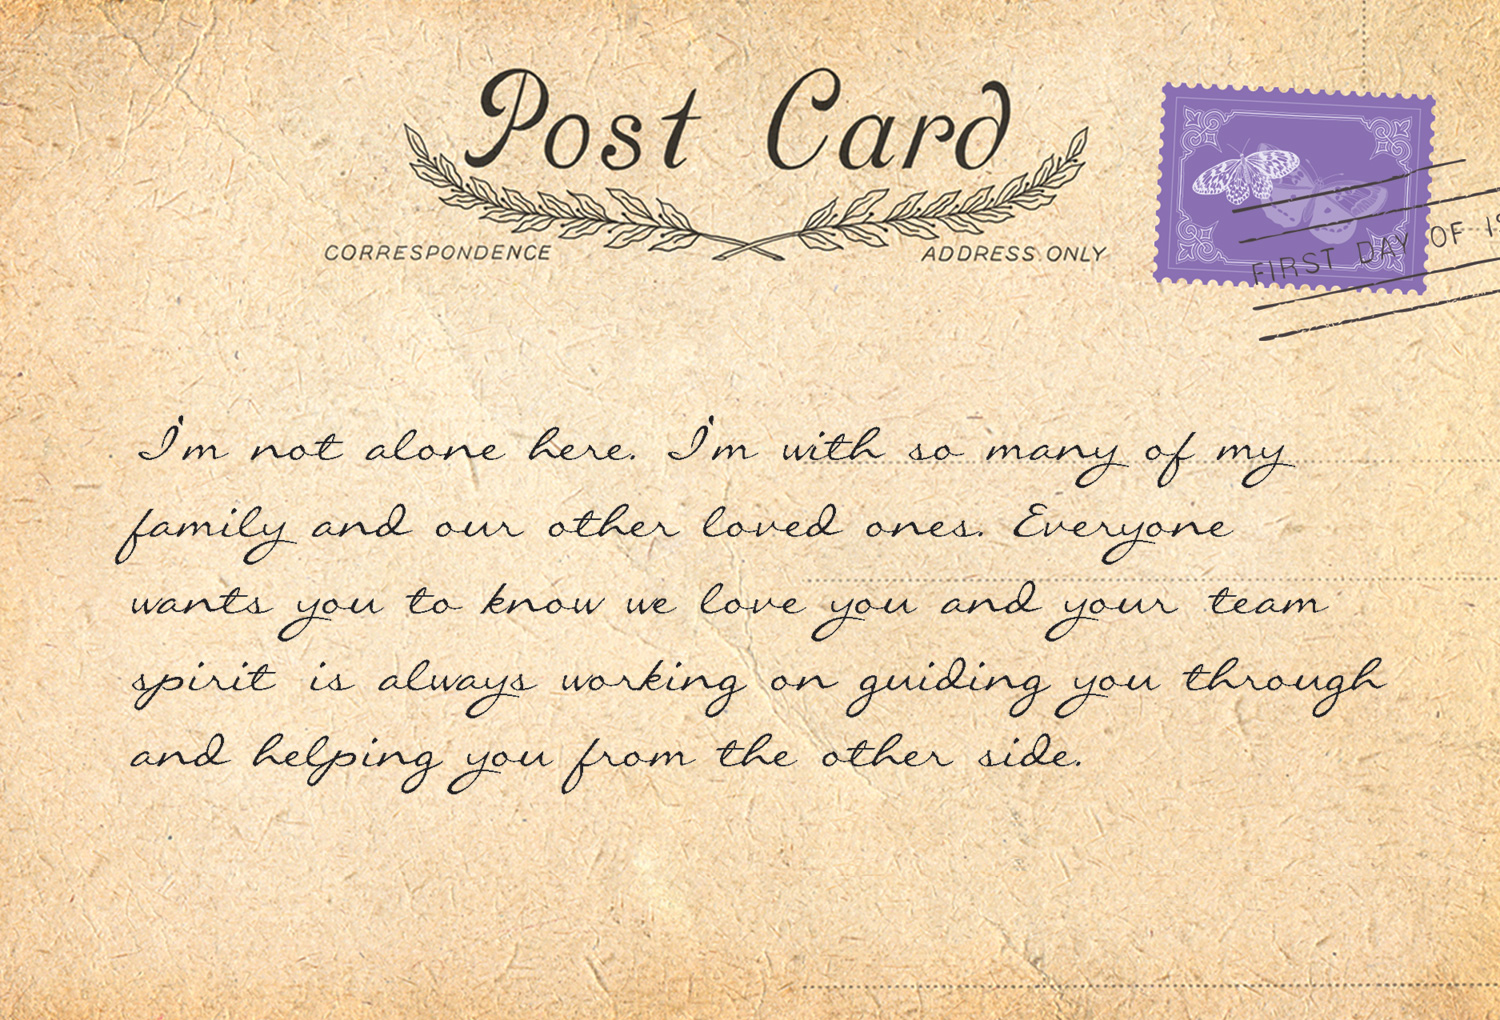 POSTCARDS FROM HEAVEN 2 - back 28